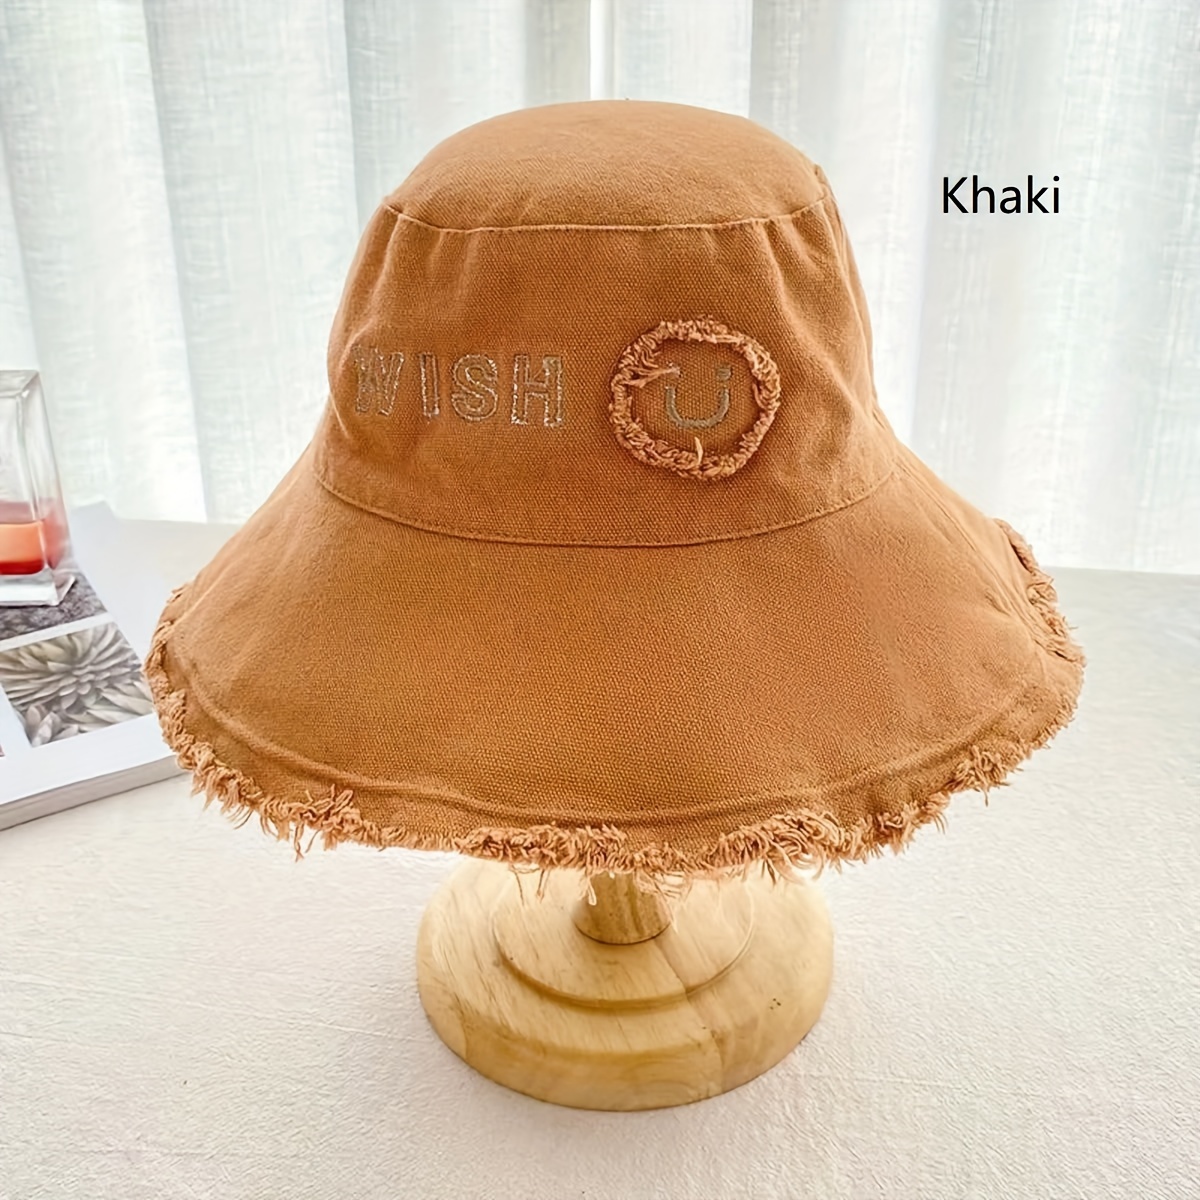 

Wide Brim Raw Hem Bucket Hat Classic Solid Color Summer Sun Hats Lightweight Uv Protection Travel Beach Hats For Women Daily Uses